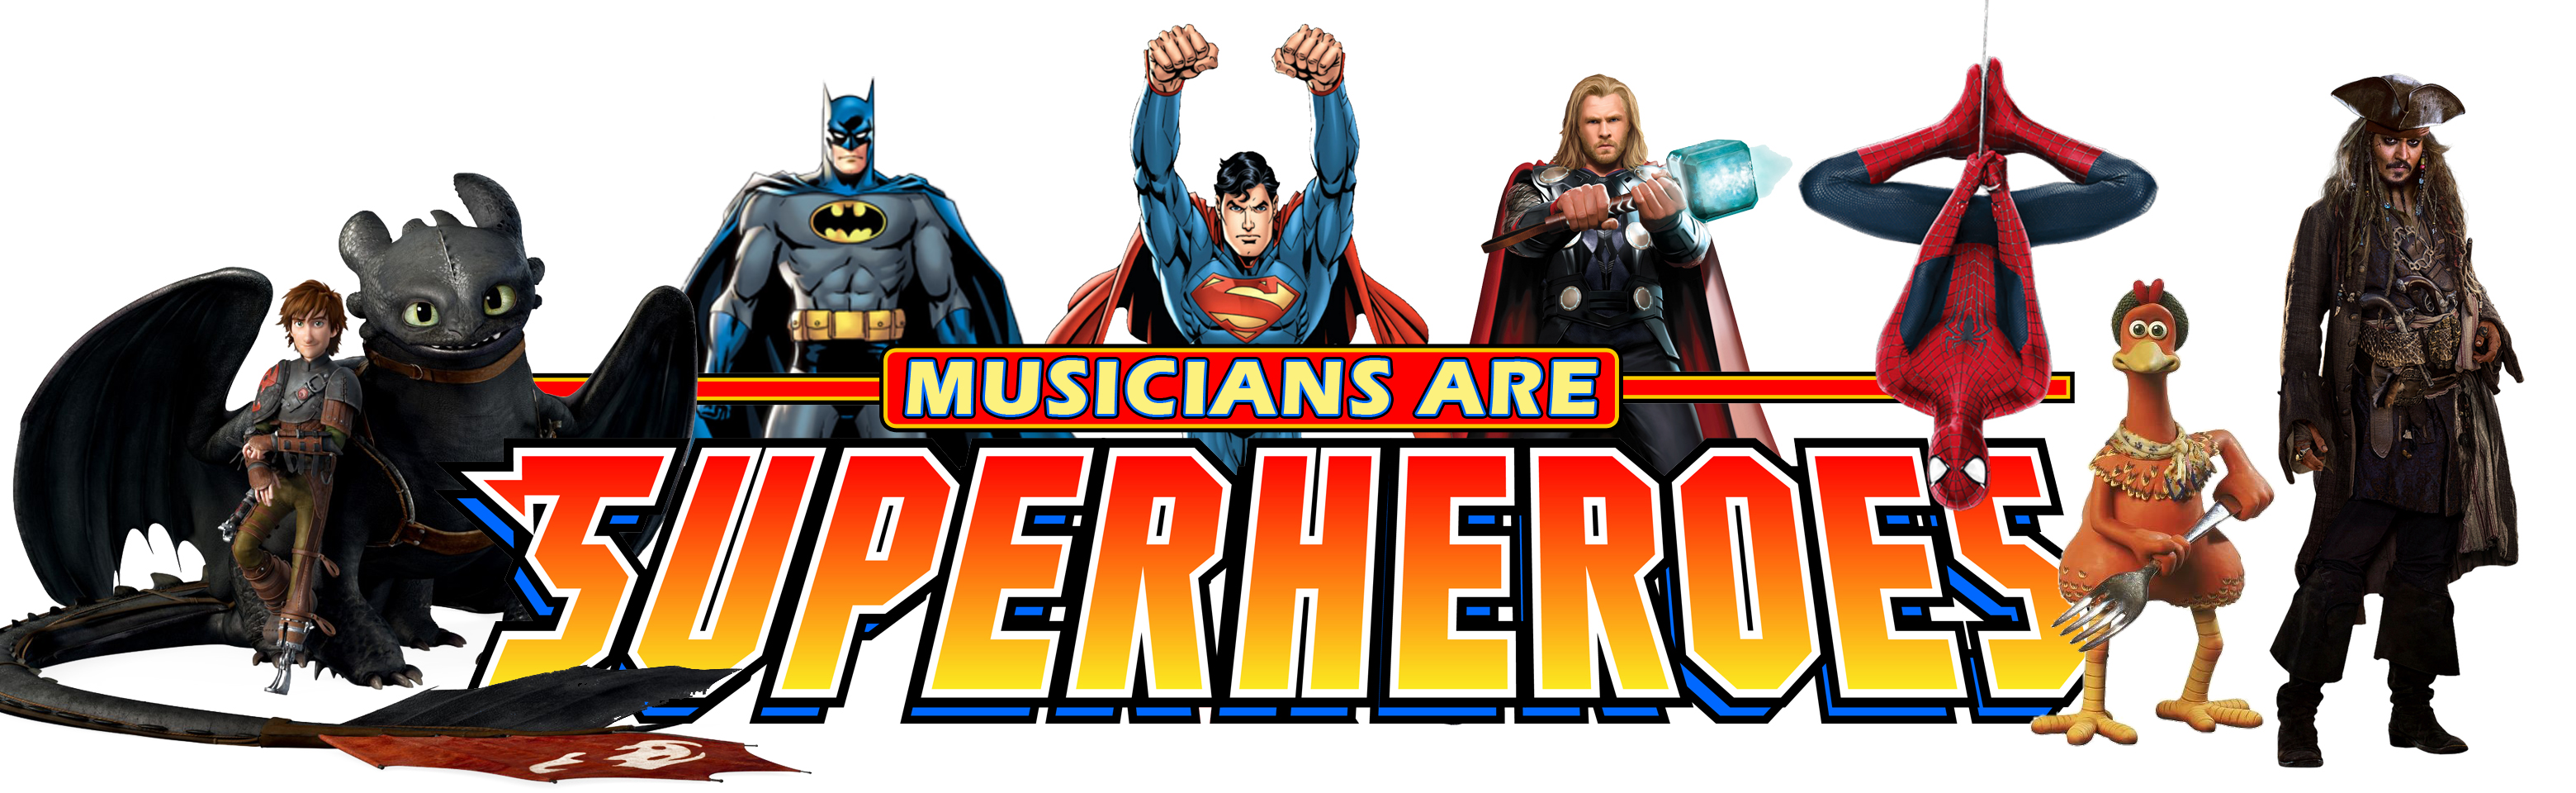 'Musicians are Superheroes' presented by Space Coast Symphony Orchestra